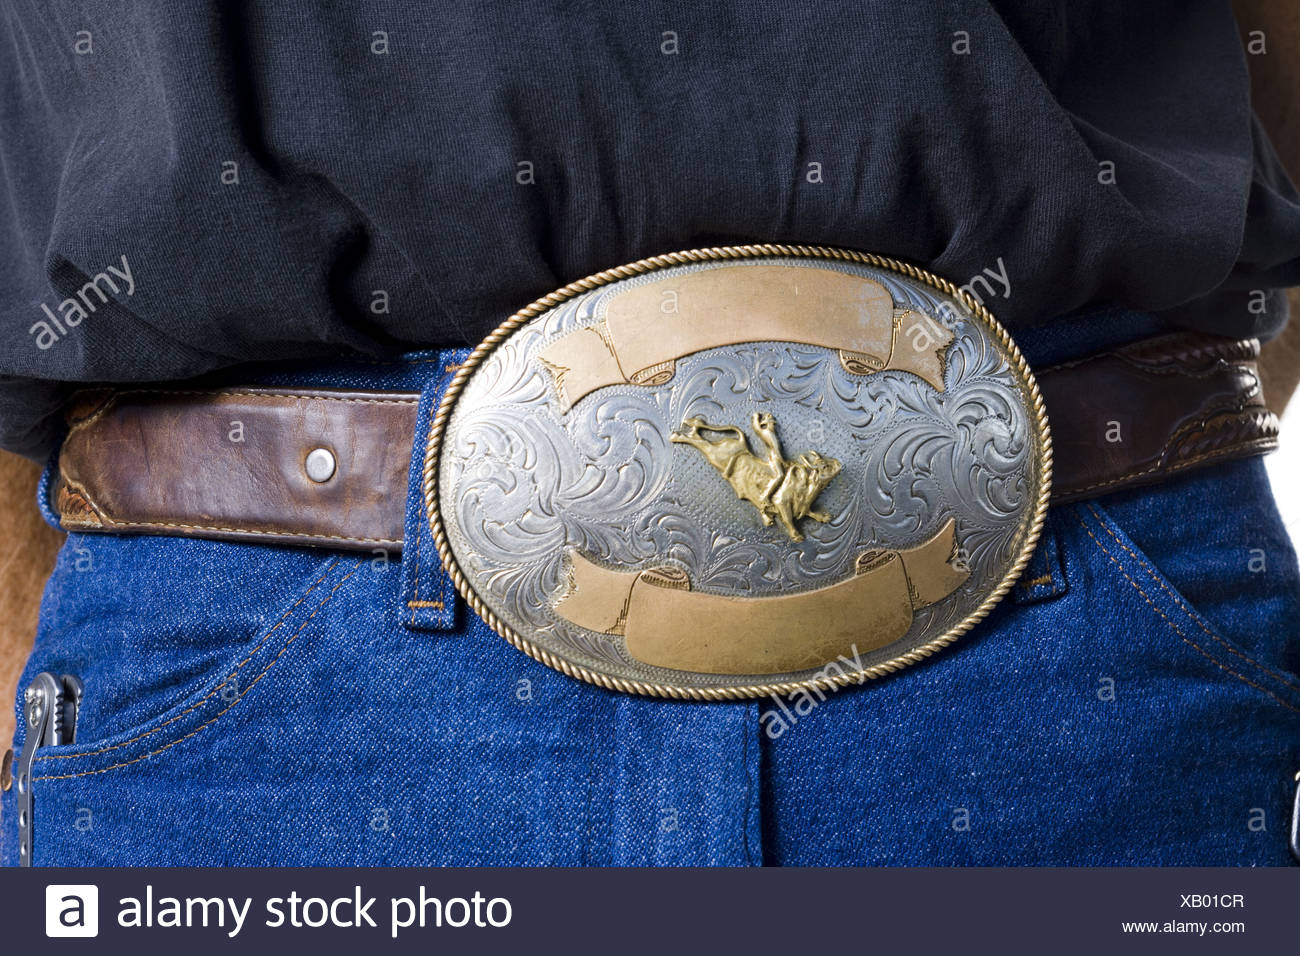 Big Belt Buckle High Resolution Stock Photography and Images - Alamy